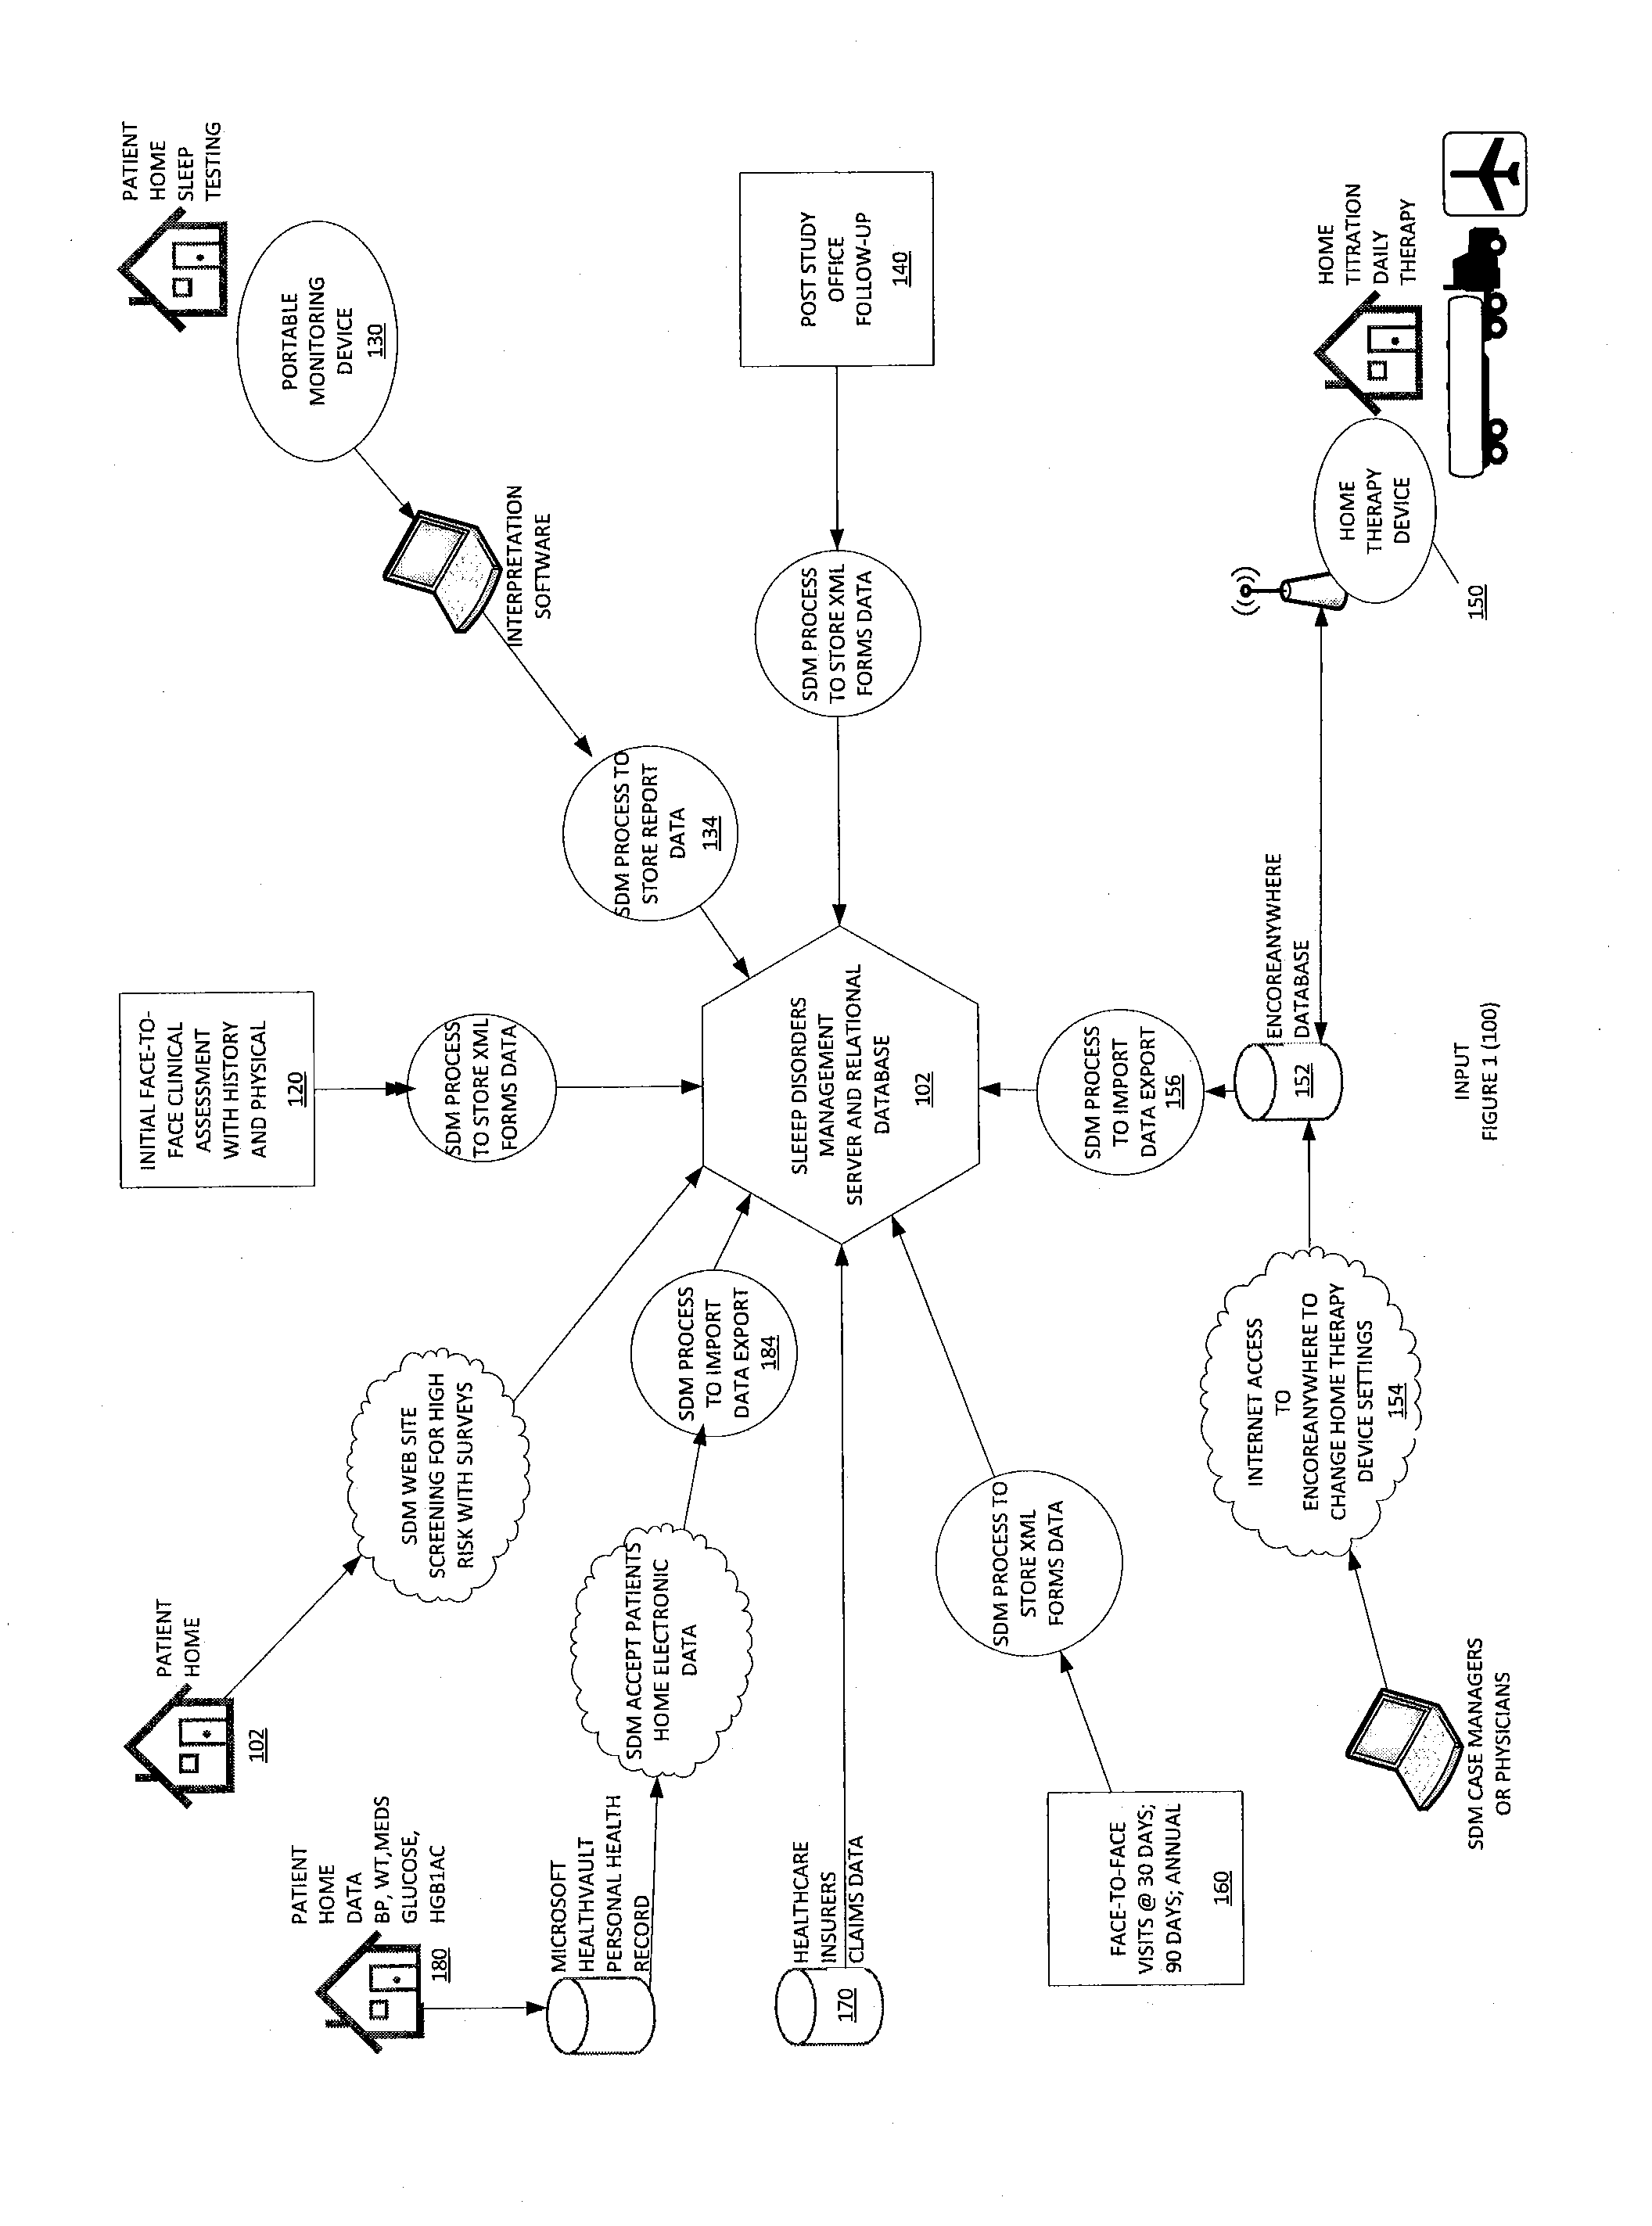 Systems and Methods for Diagnosing and Treating Sleep Disorders